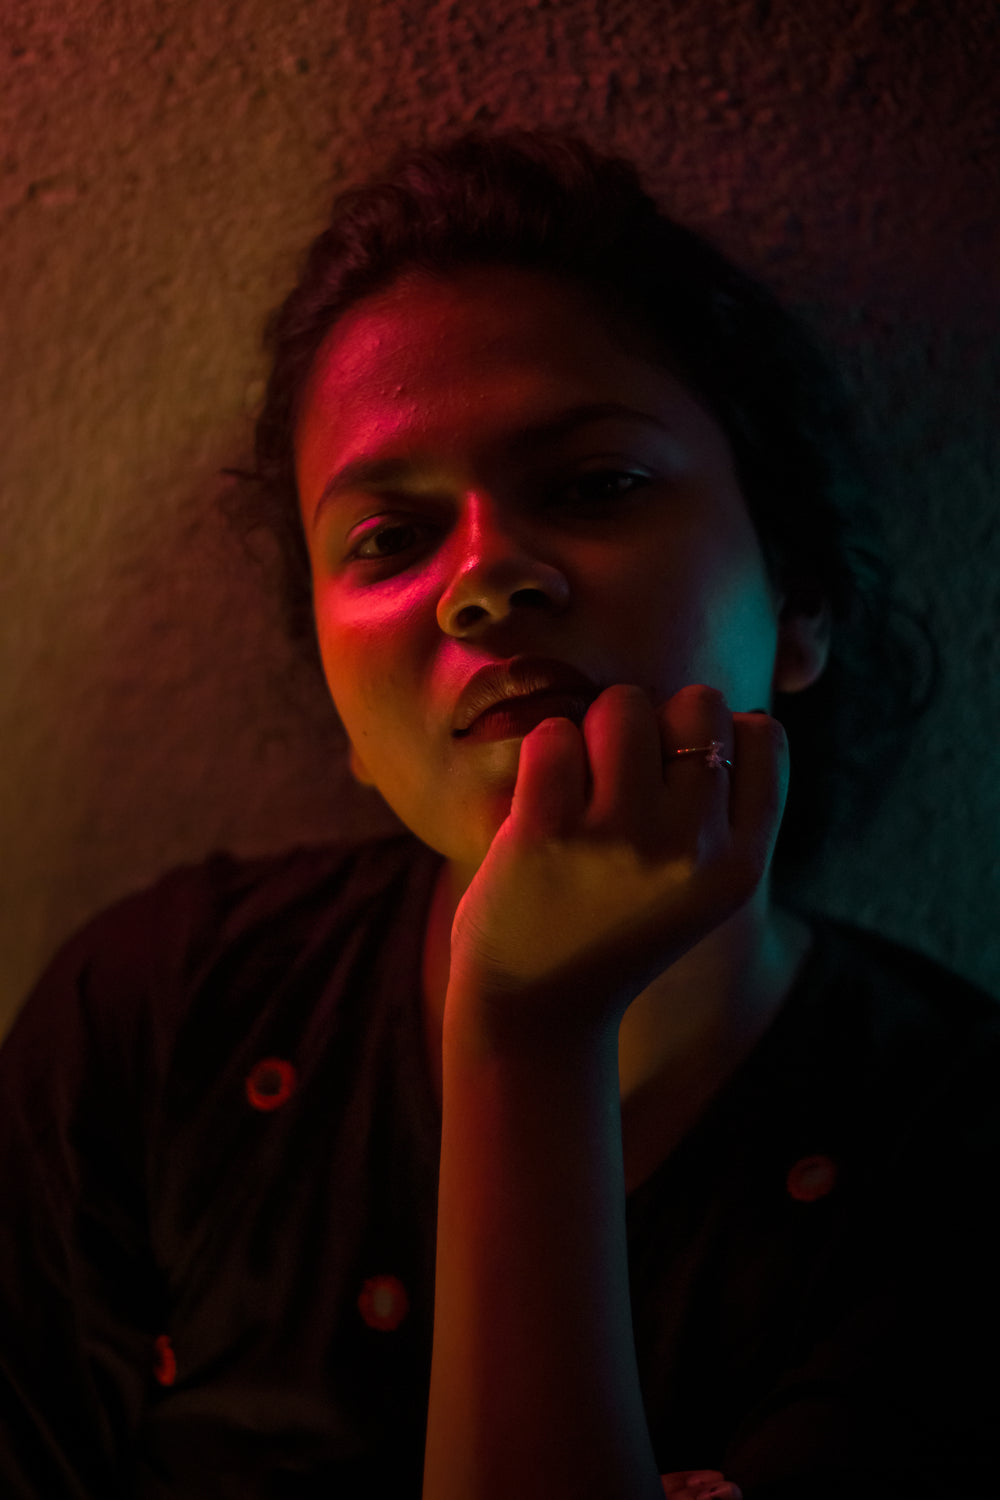 Portrait Of A Person In Multiple Colored Light